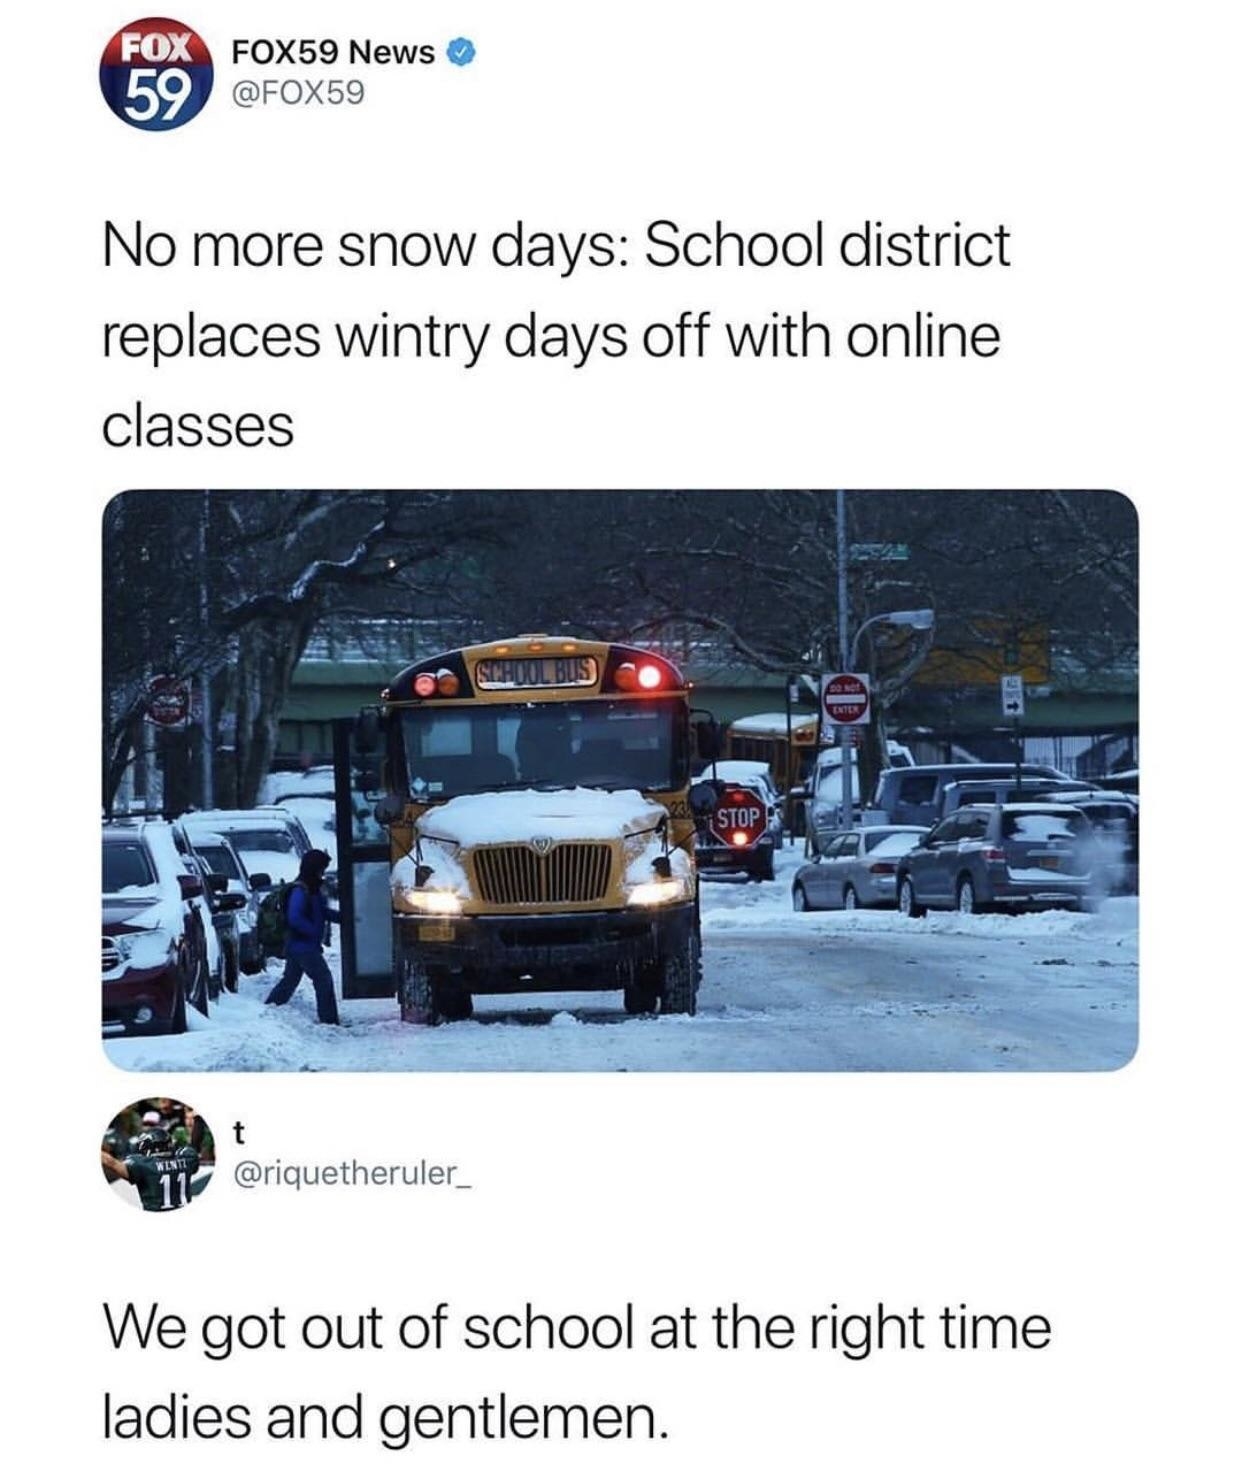 snow day online classes - Fox FOX59 News No more snow days School district replaces wintry days off with online classes Shoul Bus Stop ny We got out of school at the right time ladies and gentlemen.